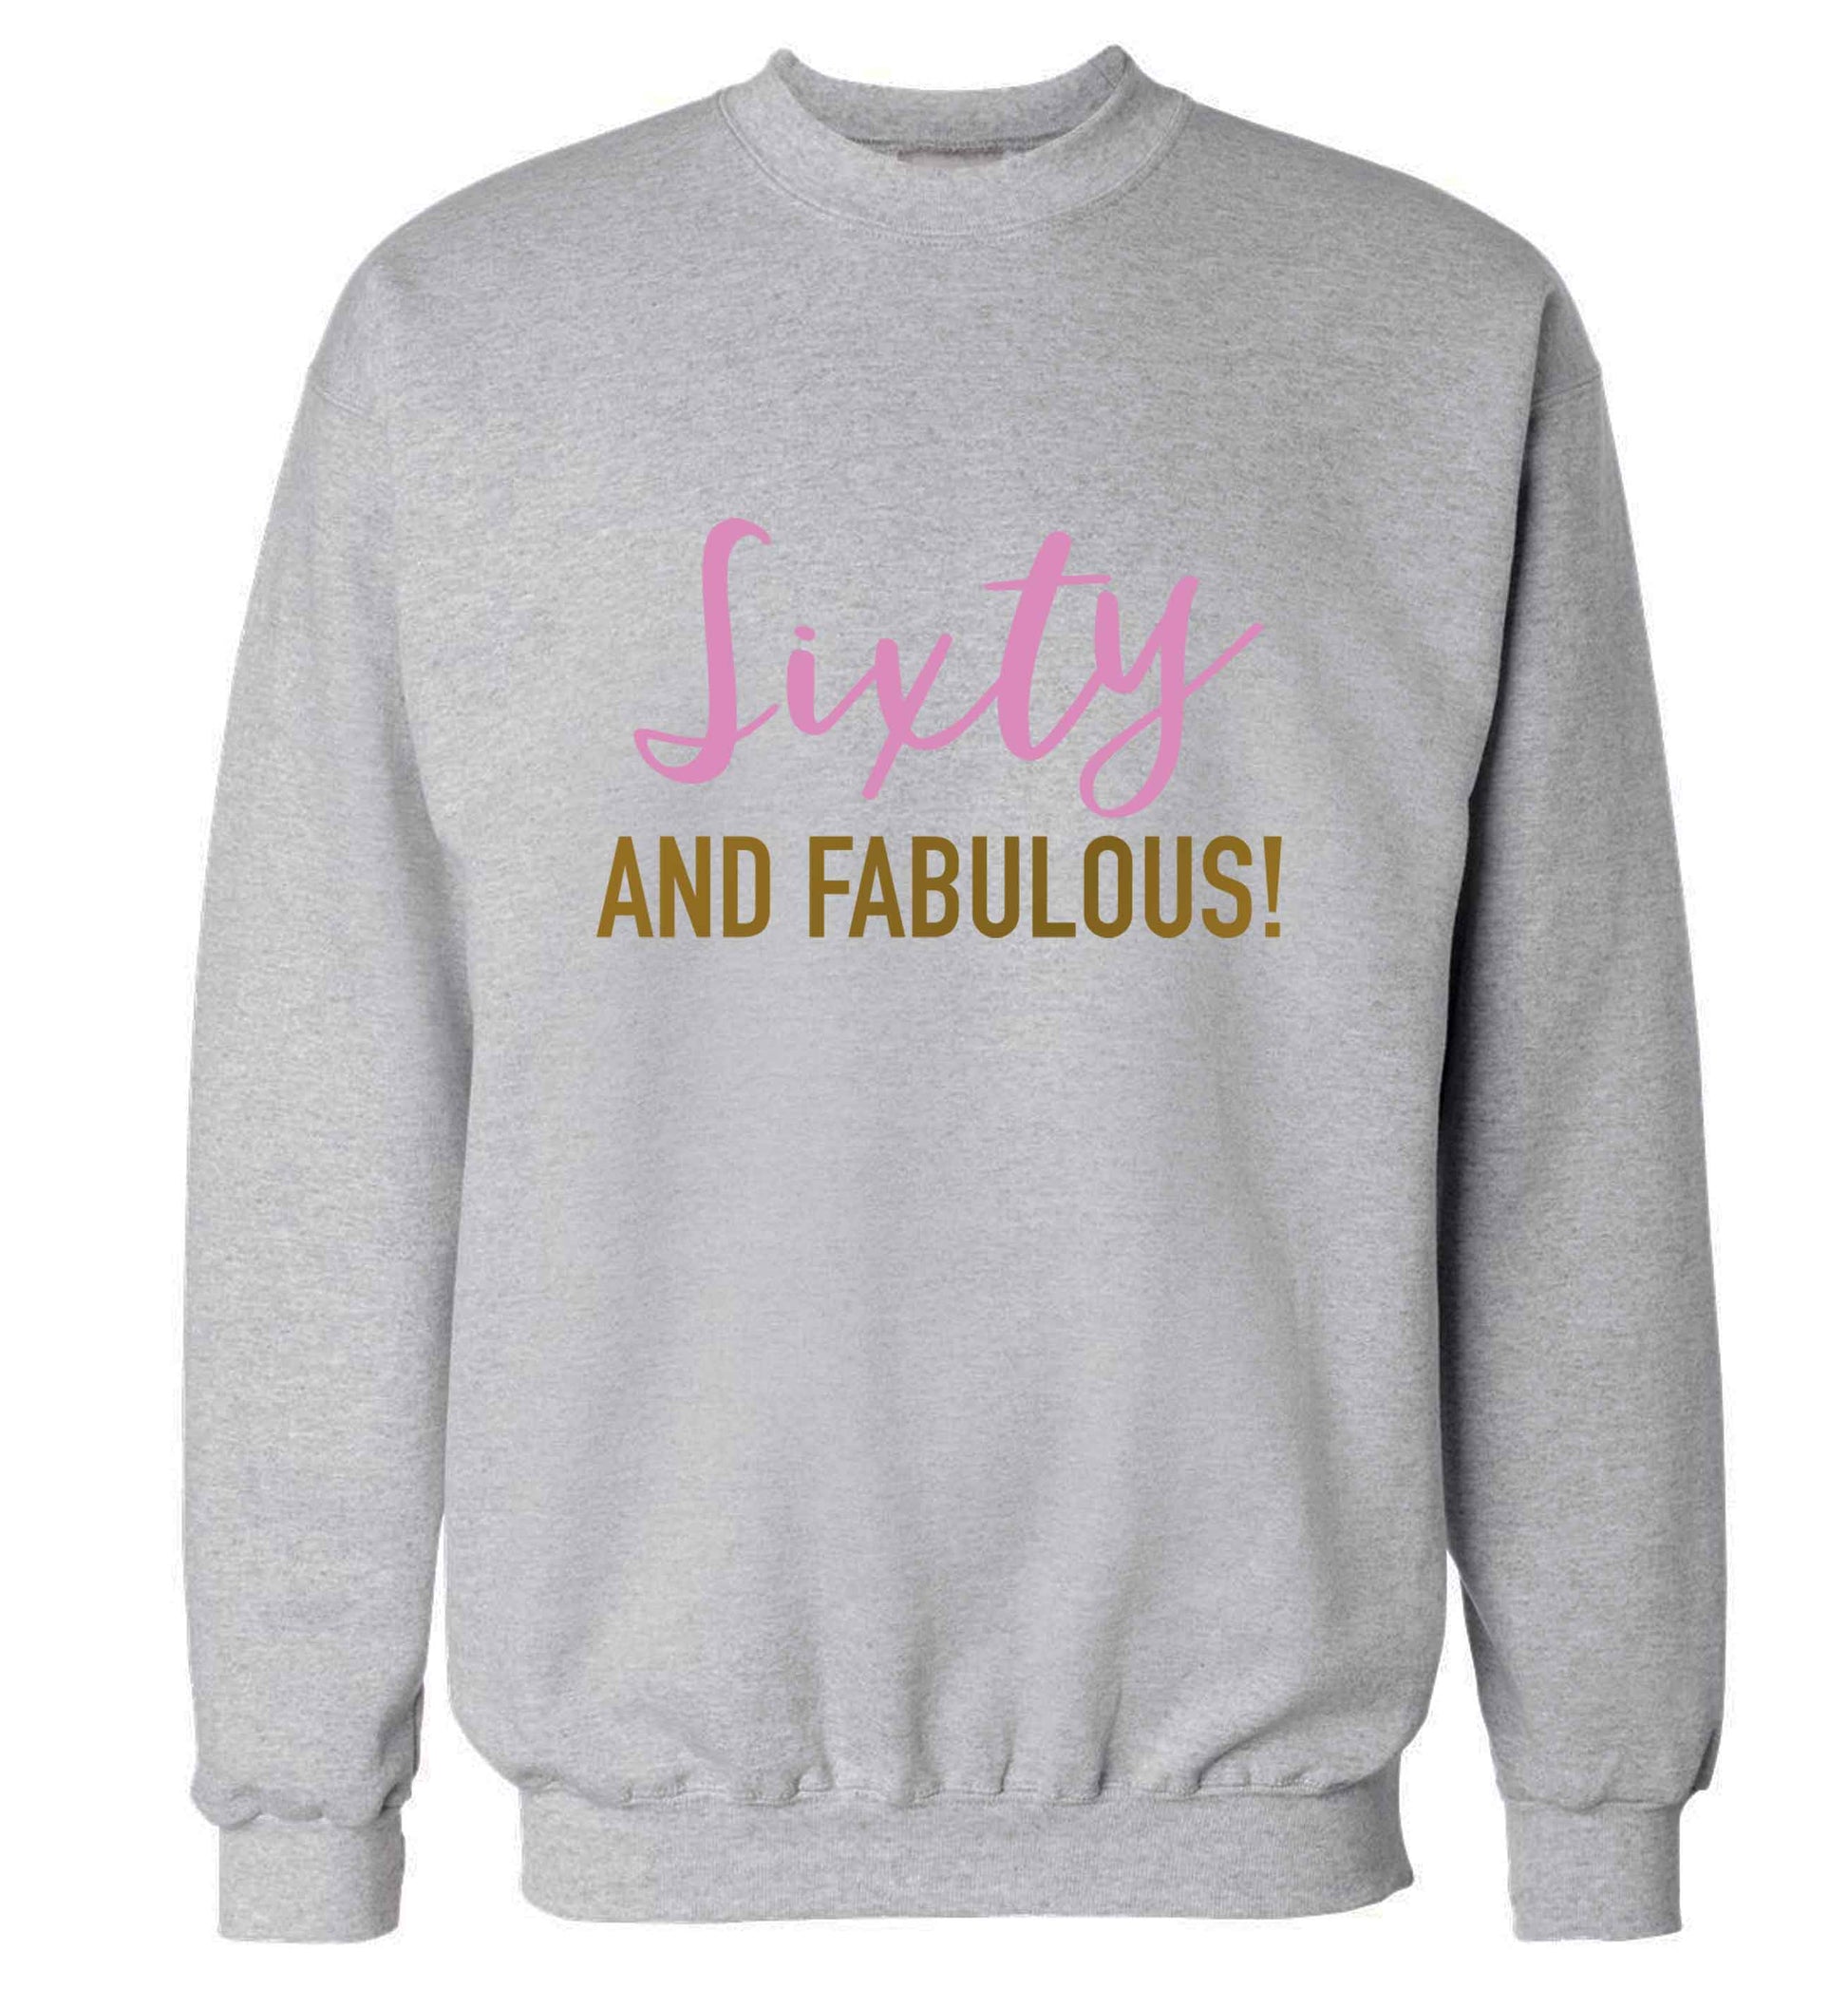 Sixty and fabulous adult's unisex grey sweater 2XL